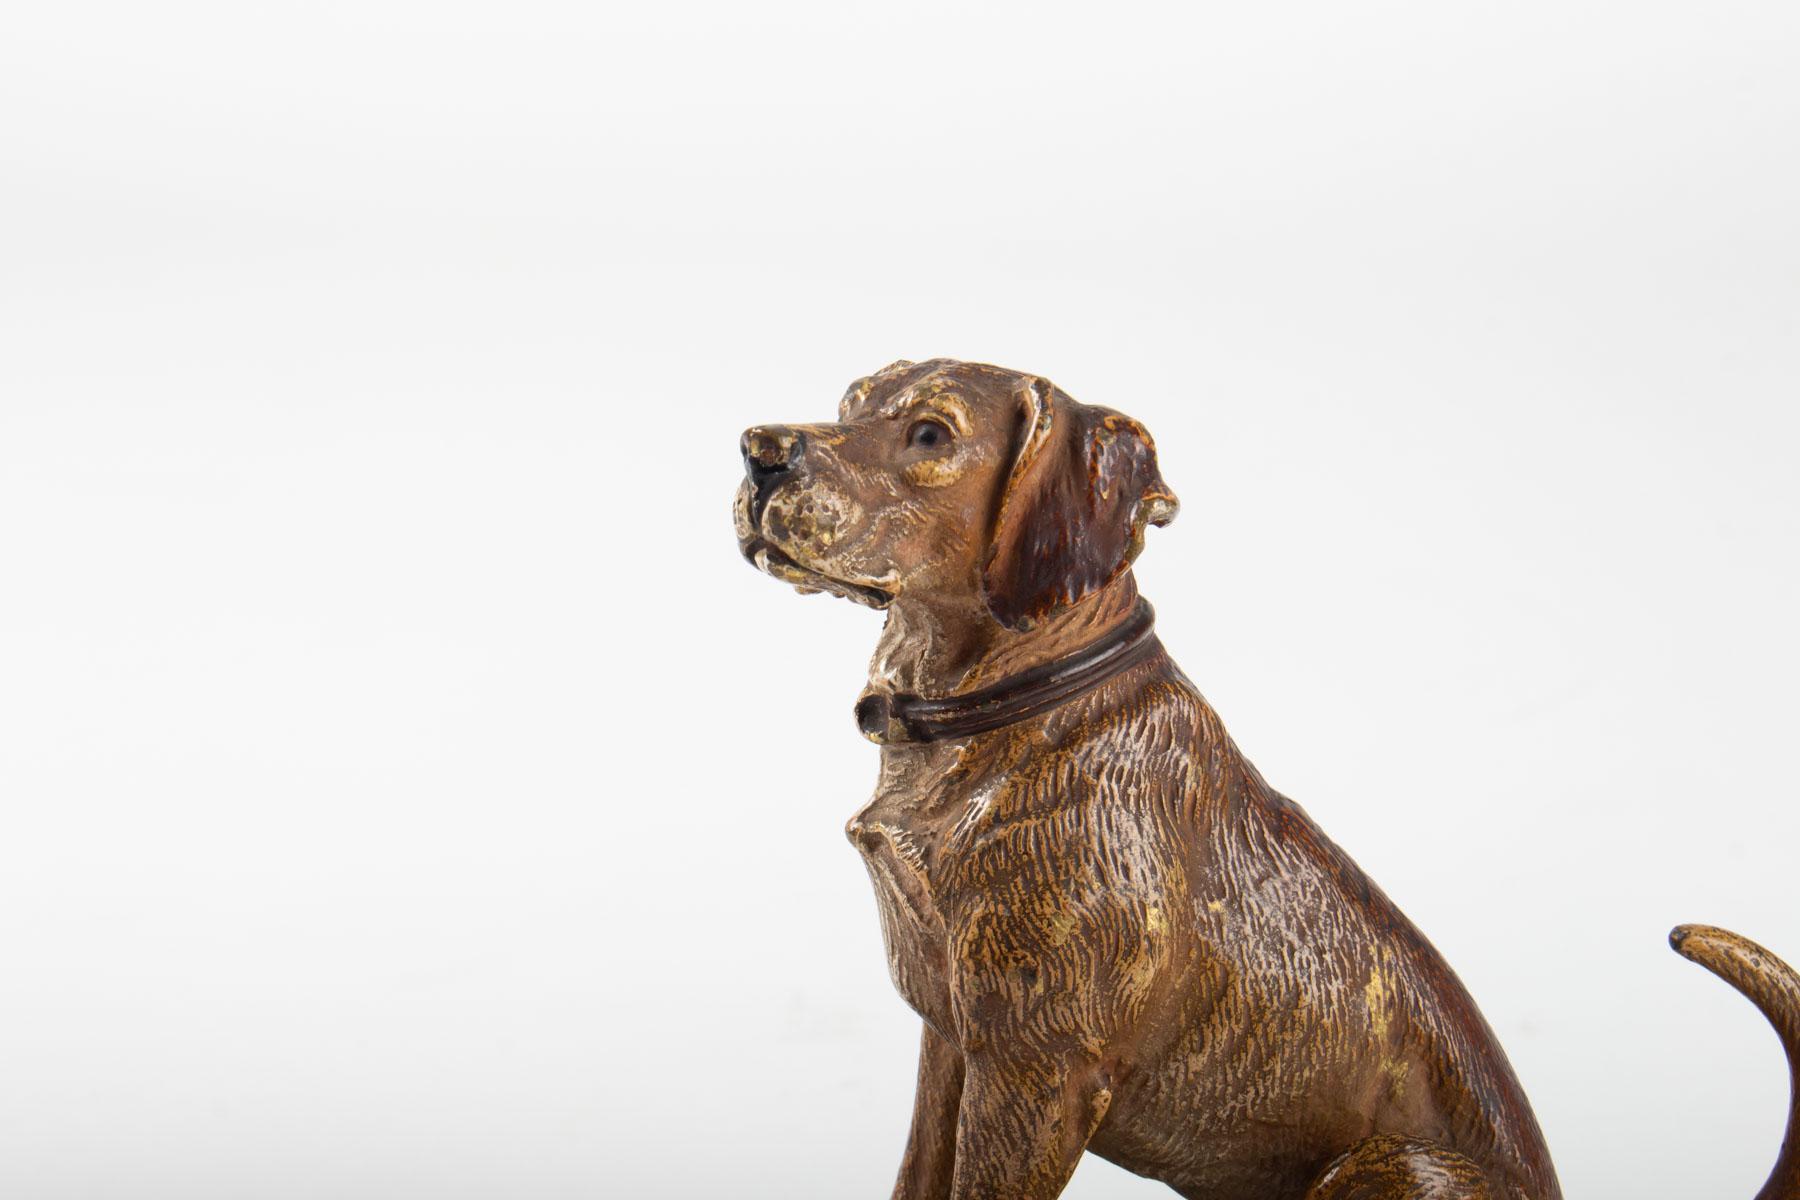 Dog, bronze Vienna, marble base, early 20th century, animal bronze high quality and chisel
Measures: H 12cm, W 12cm, W 7cm.